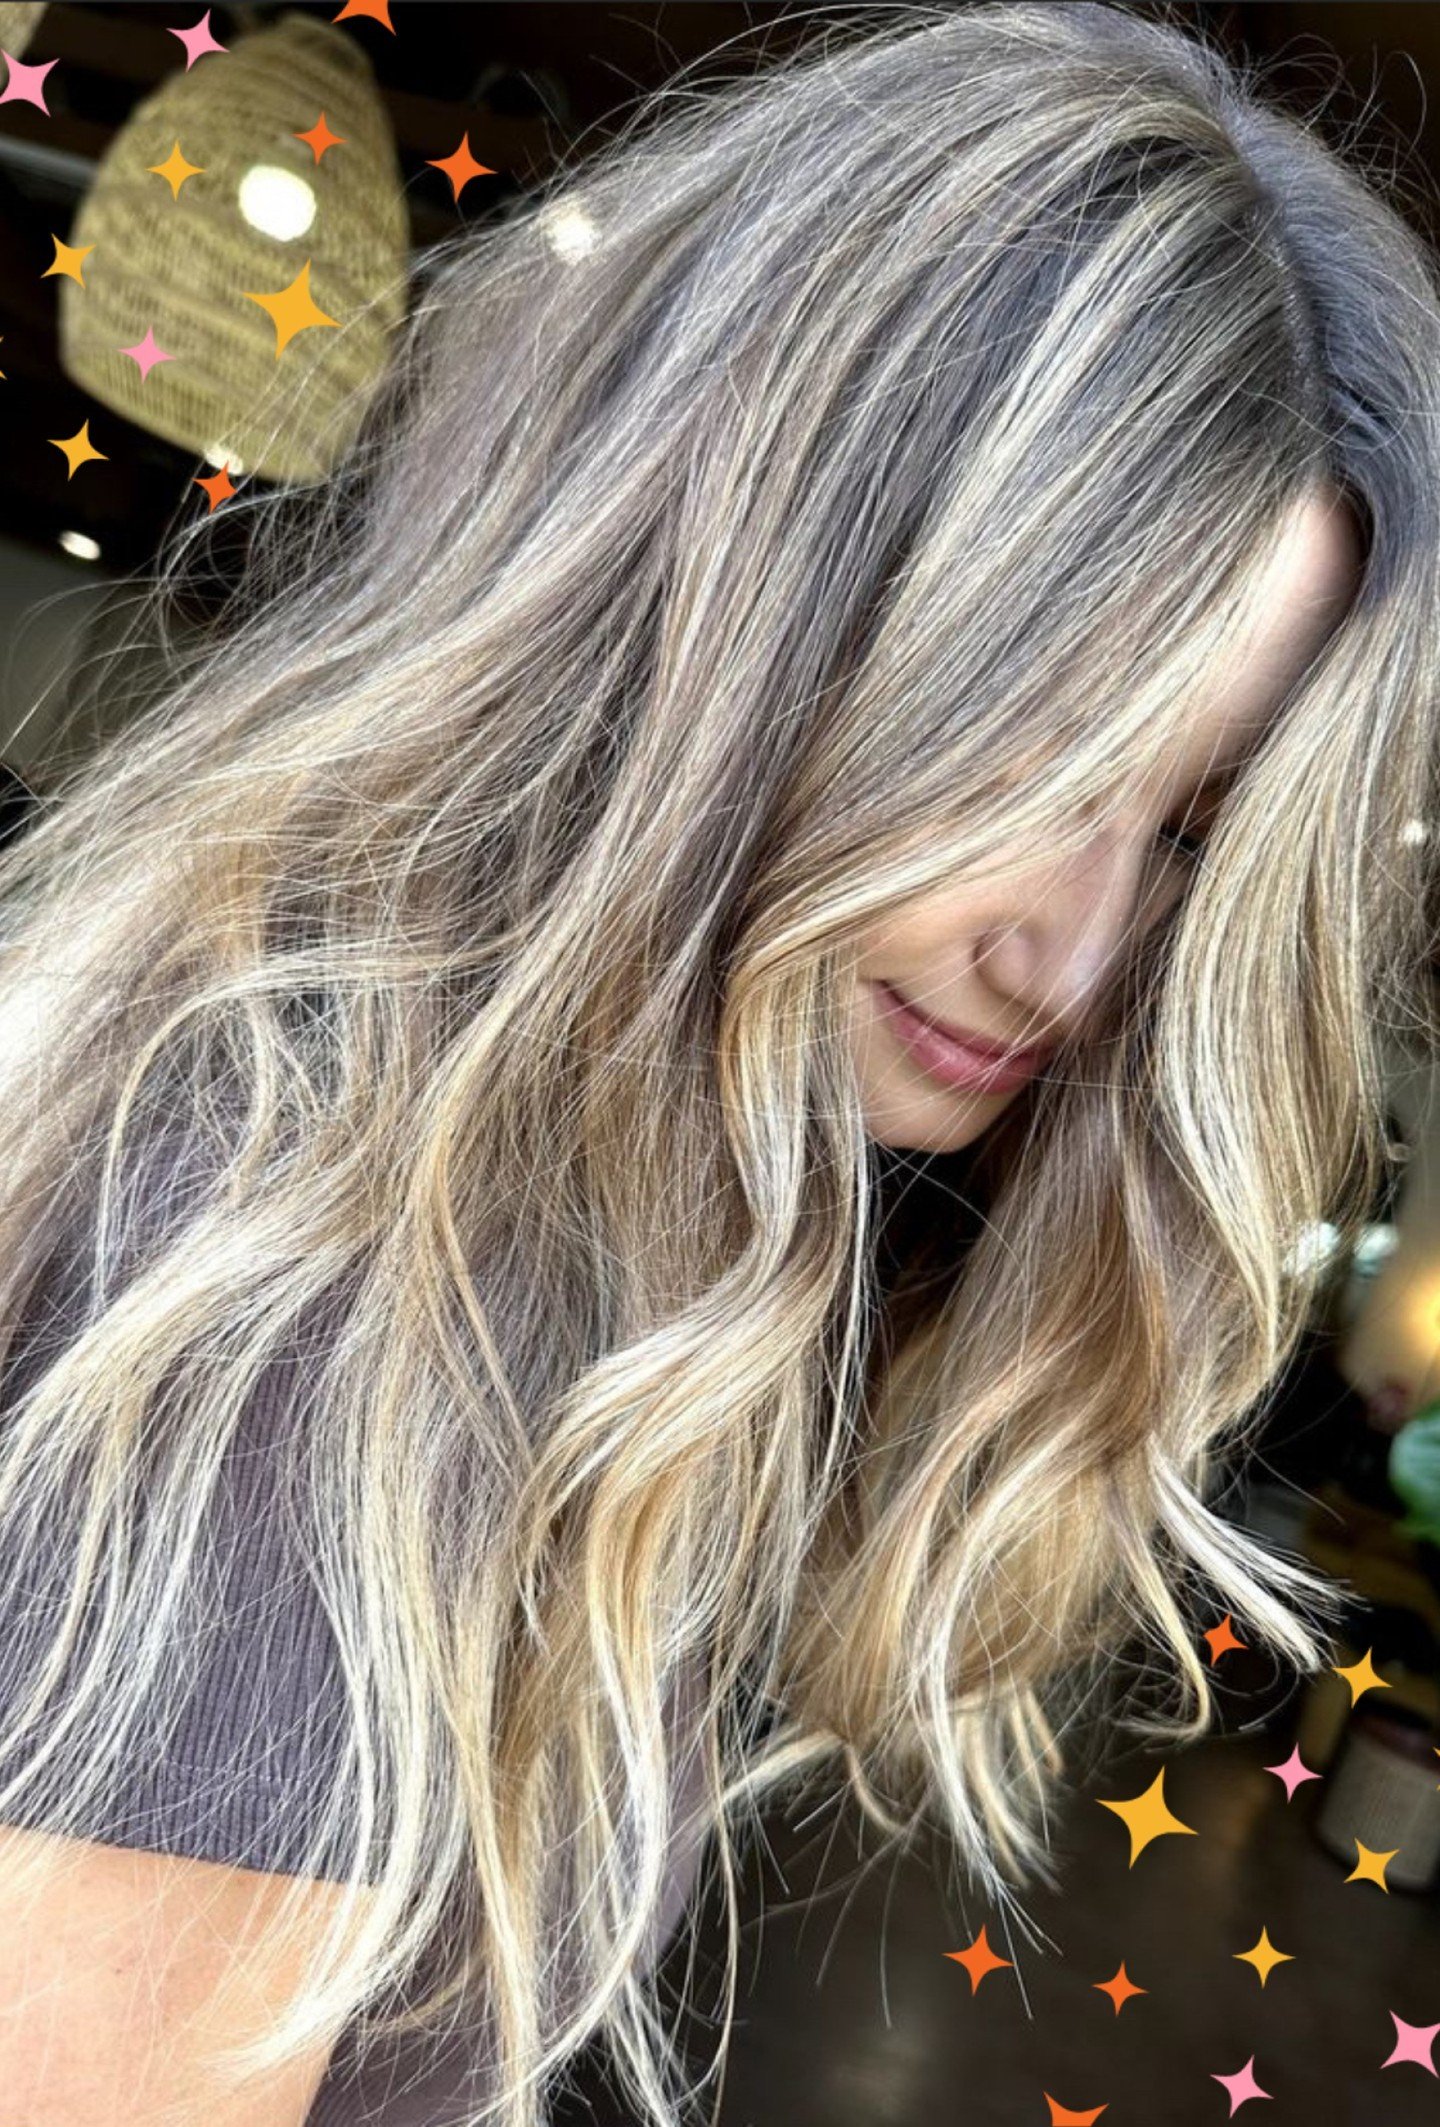 Balayage that makes. your mouth melt ✨ Book it! Follow the link in bio and follow @bgamcos while you're at it! She kills it ✨
*
*
*
*
*
#randco #randcocolor #randcolove #phoenixaz #phoenixazsalon #swoonsalon